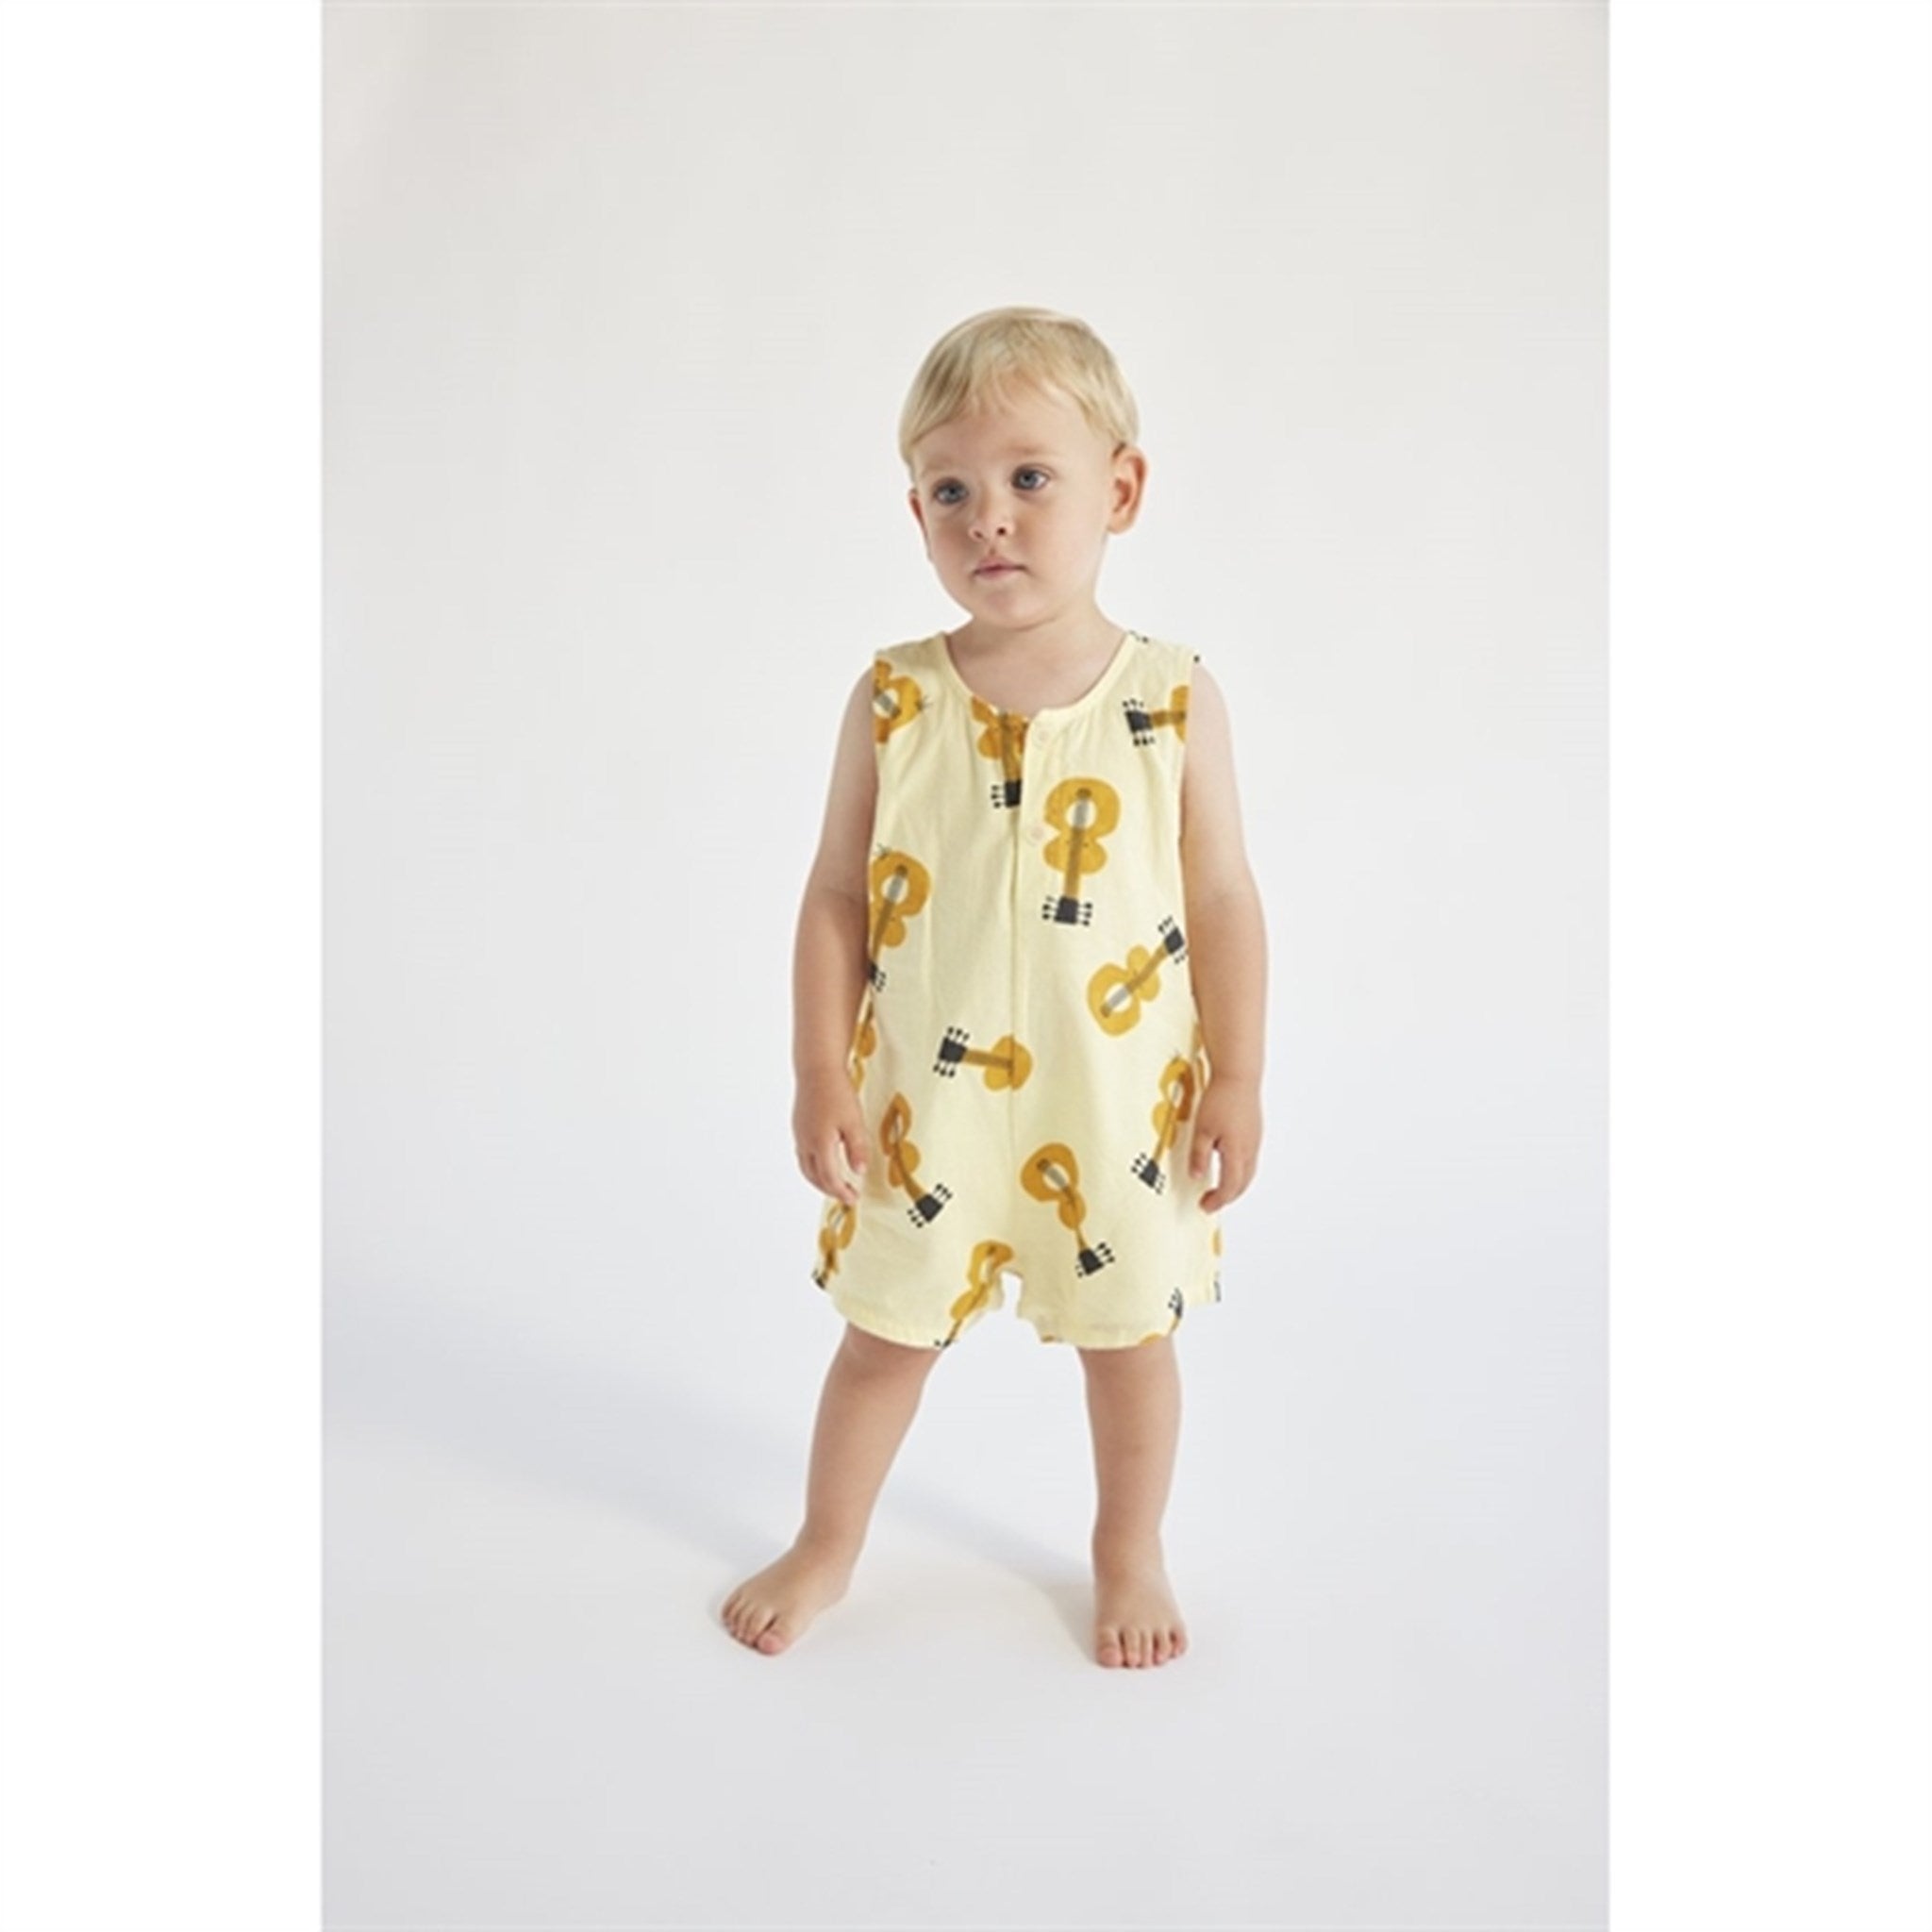 Bobo Choses Baby Acoustic Guitar All Over Woven Playsuit Sleeveless Light Yellow 4